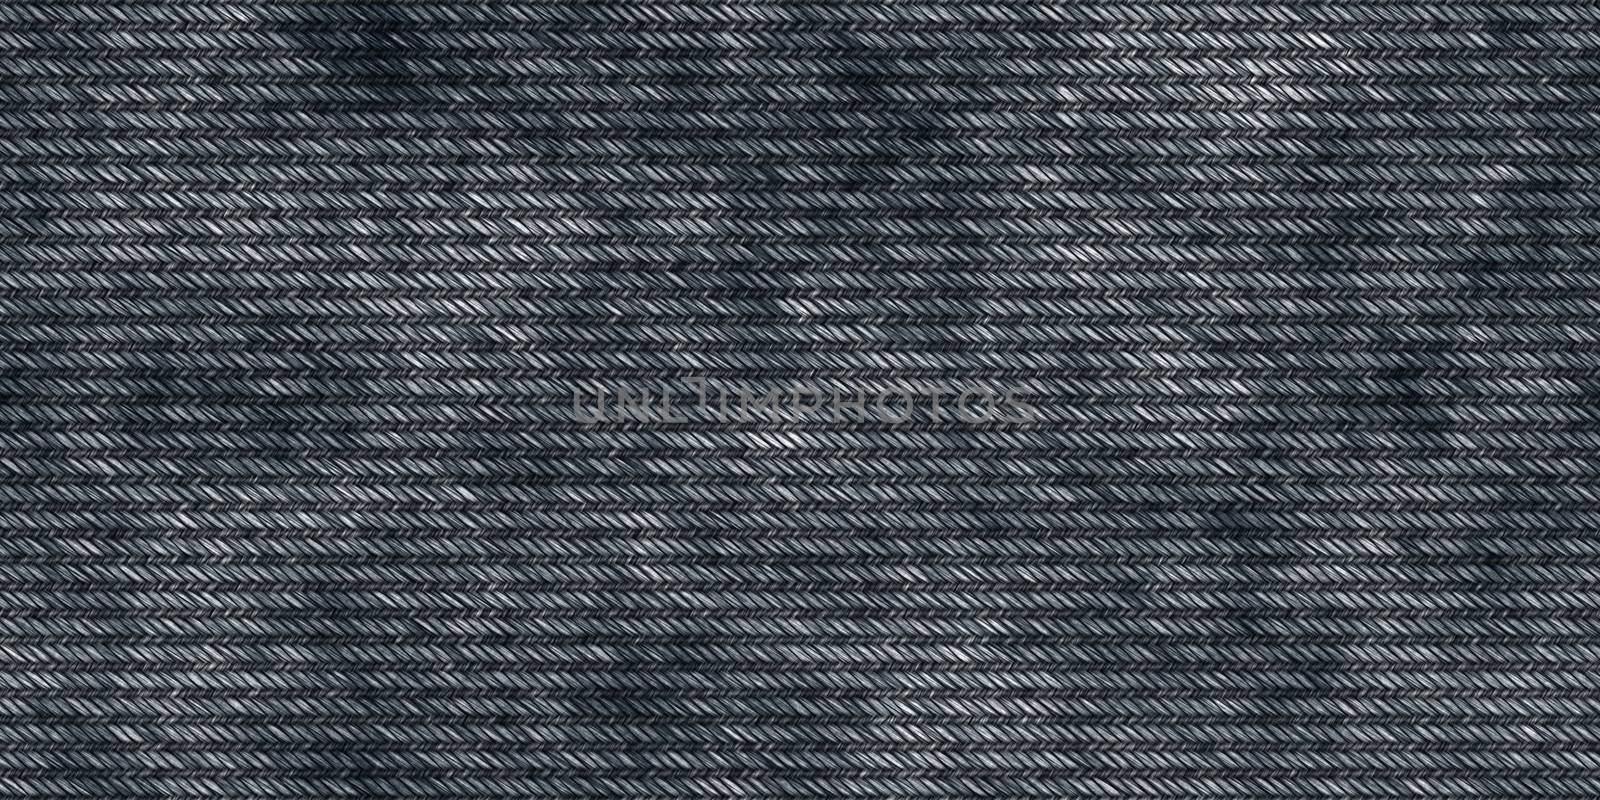 Black Jeans Denim Seamless Textures. Textile Fabric Background. Jeans Clothing Material Surface. Grunge Wear Pattern.